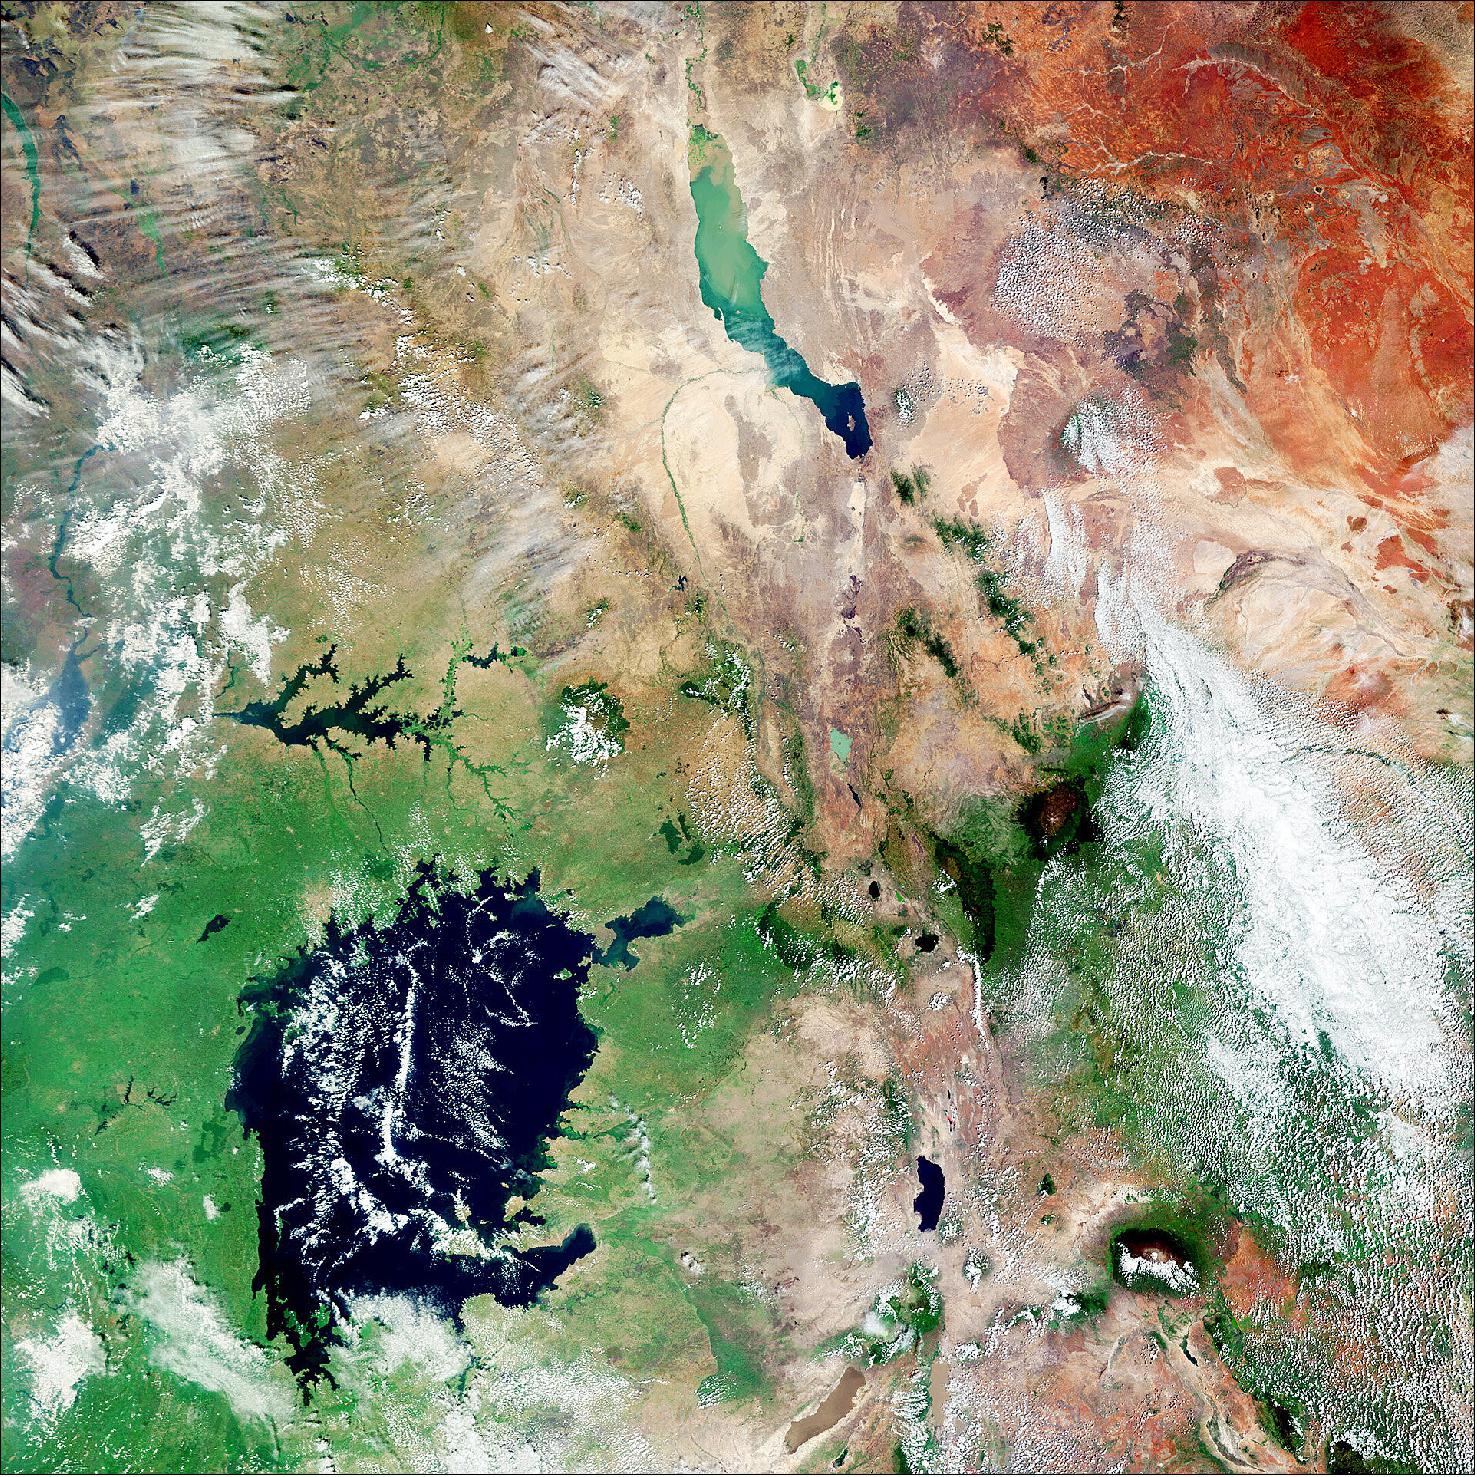 Figure 3: Lake Victoria and Lake Turkana are featured in this image captured by the Copernicus Sentinel-3 mission. These two large African lakes that were included in a new study published today in the AGU journal Geophysical Research Letters. According to the study's main findings, lakes at lower latitudes such as these are anticipated to experience the greatest increase in severe lake heatwaves (image credit: ESA, the image contains modified Copernicus Sentinel (2021), processed by ESA, CC BY-SA 3.0 IGO)